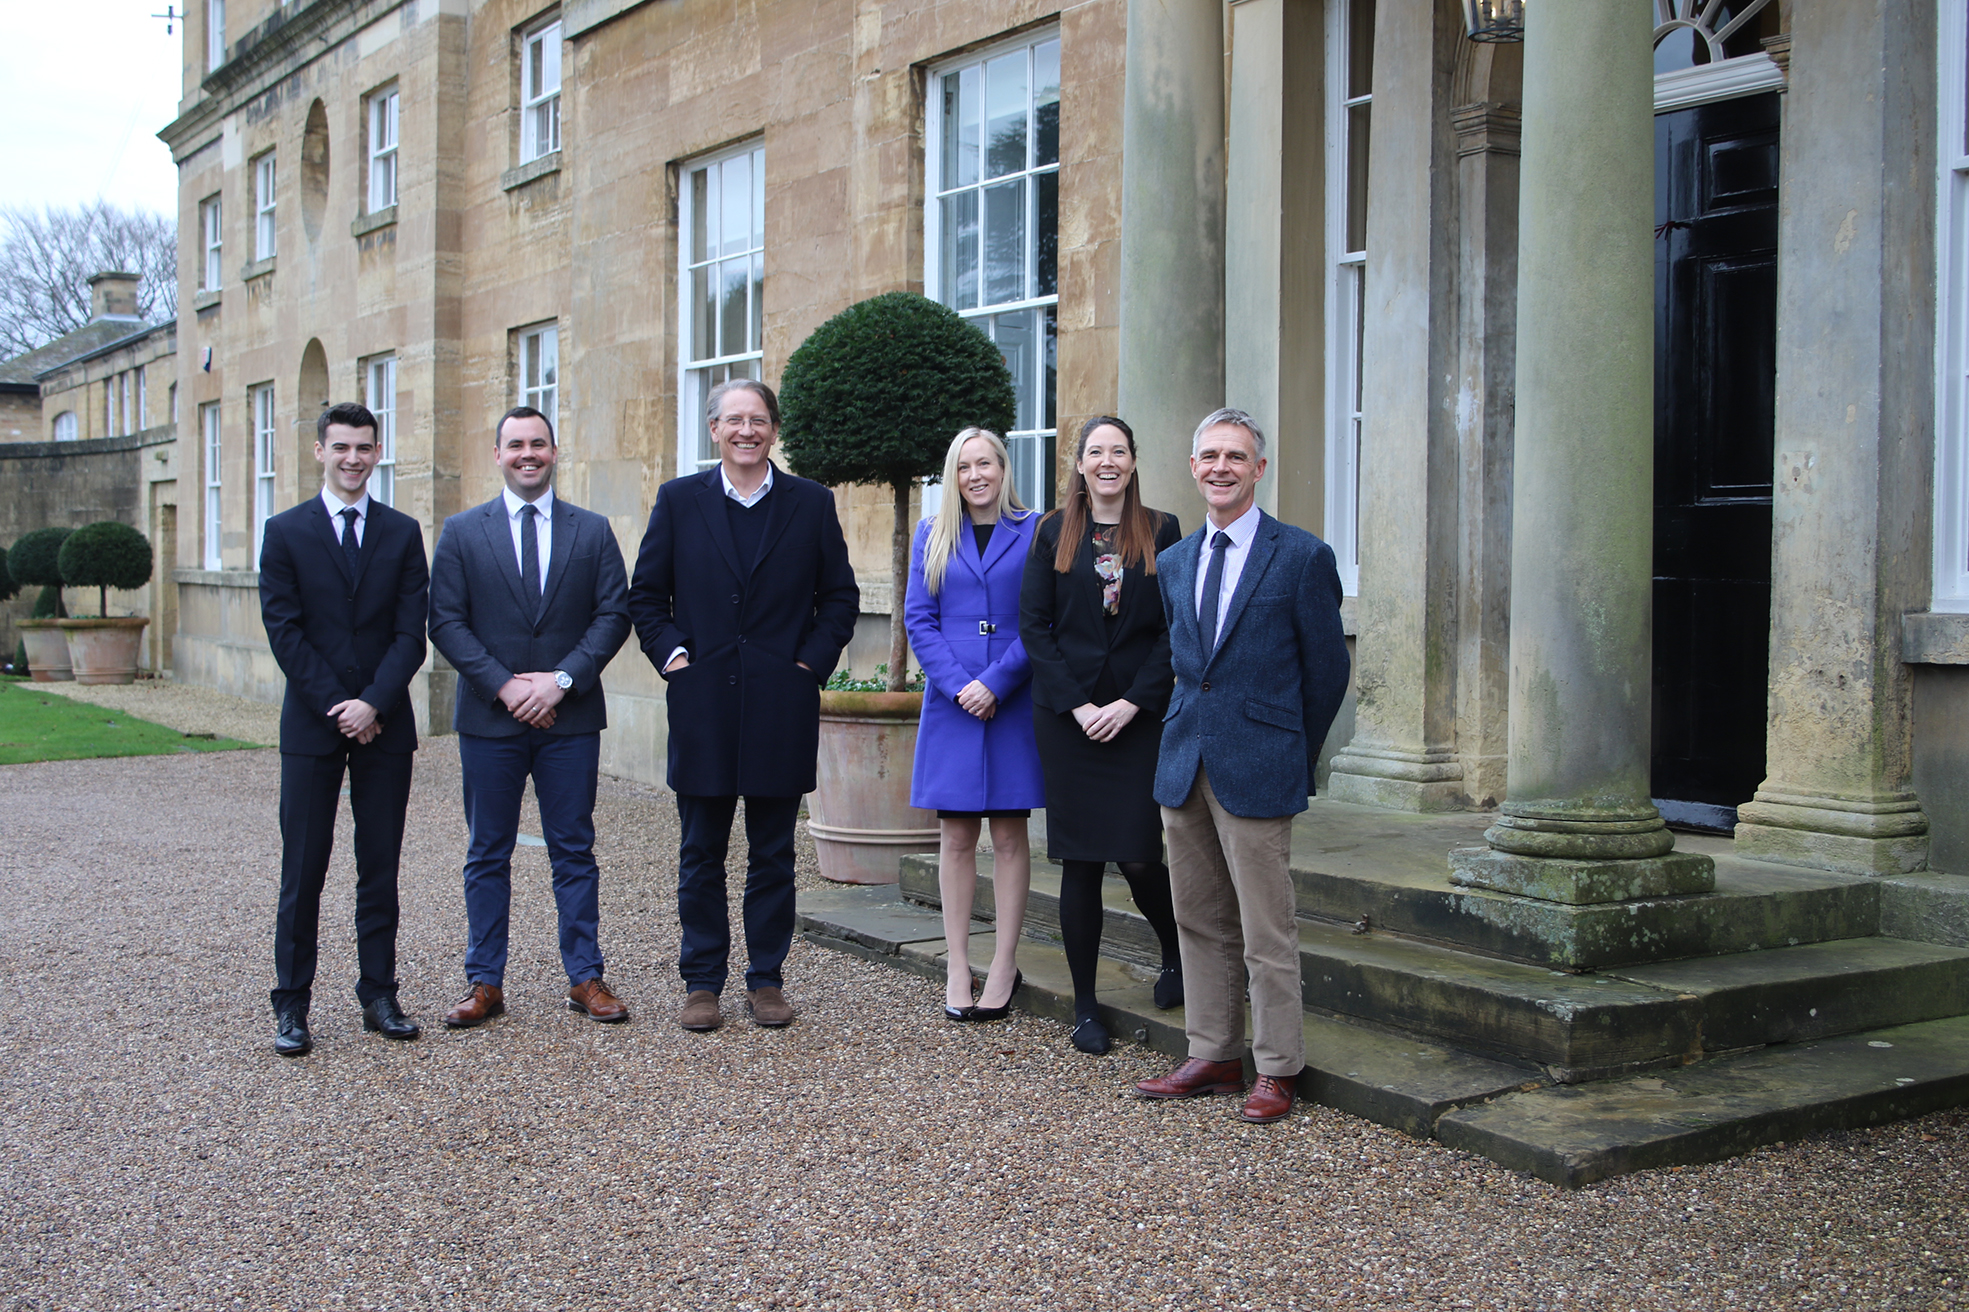 Artorius Wealth moves into new Yorkshire offices